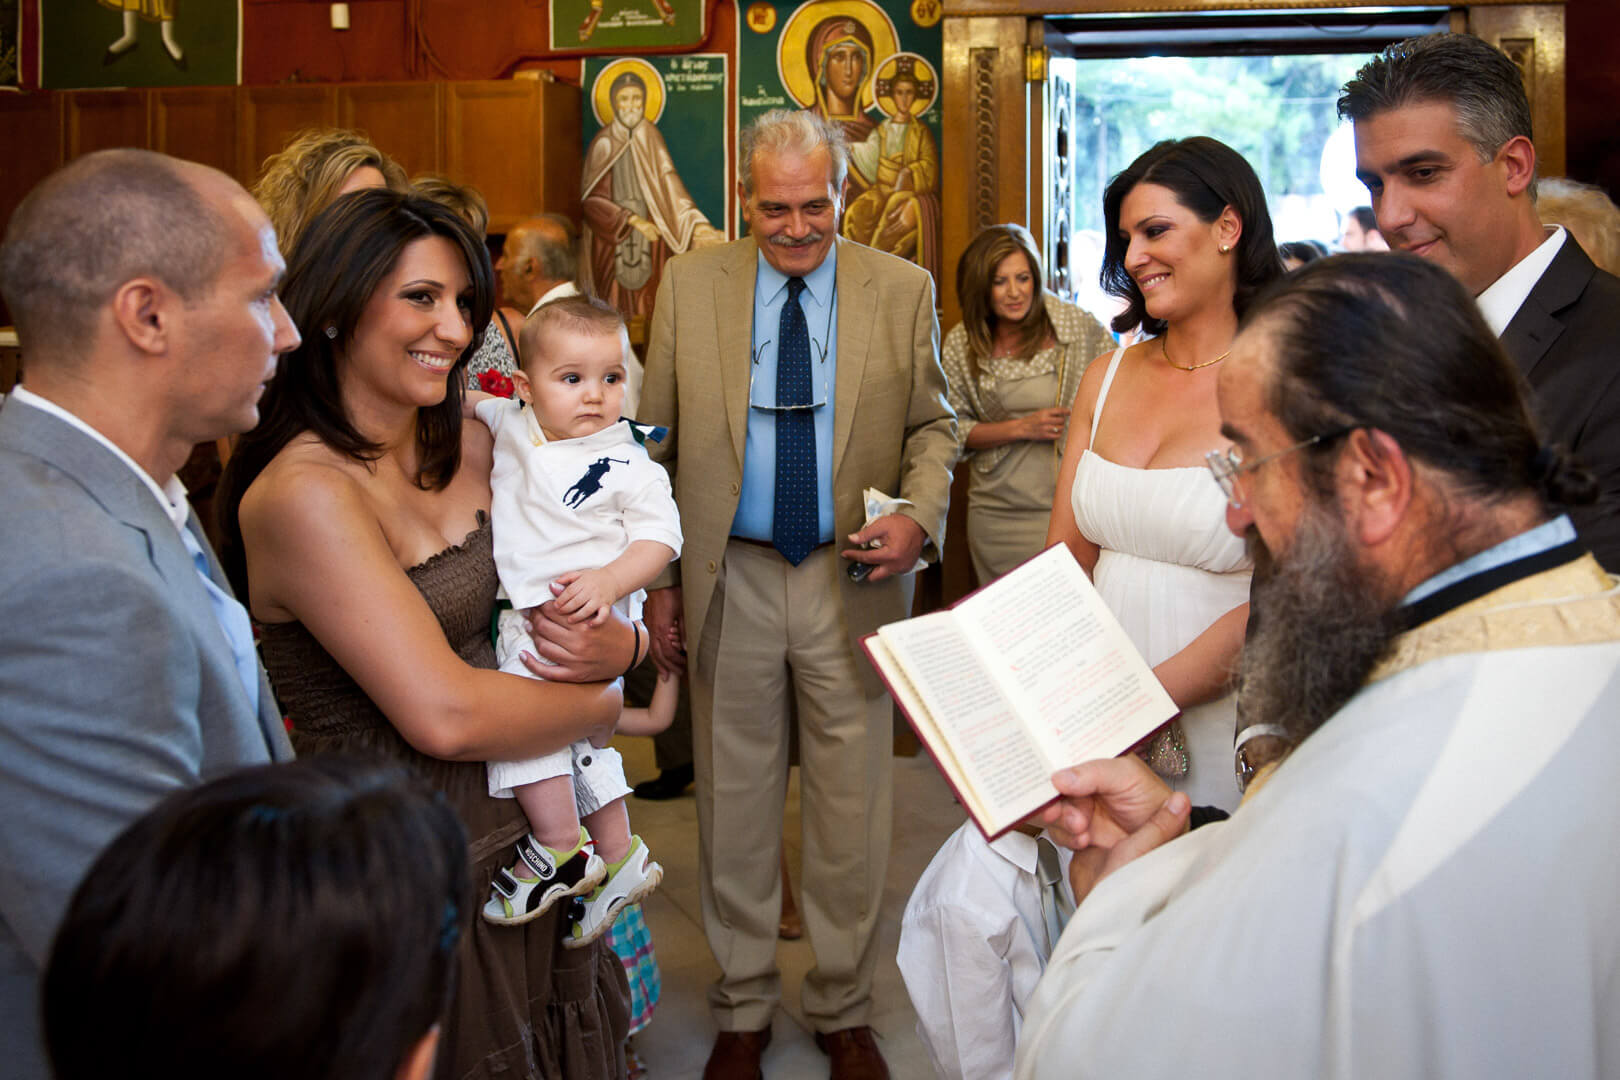 Family love and faith unite: beaming baby rests in mother's arms during christening blessings. 